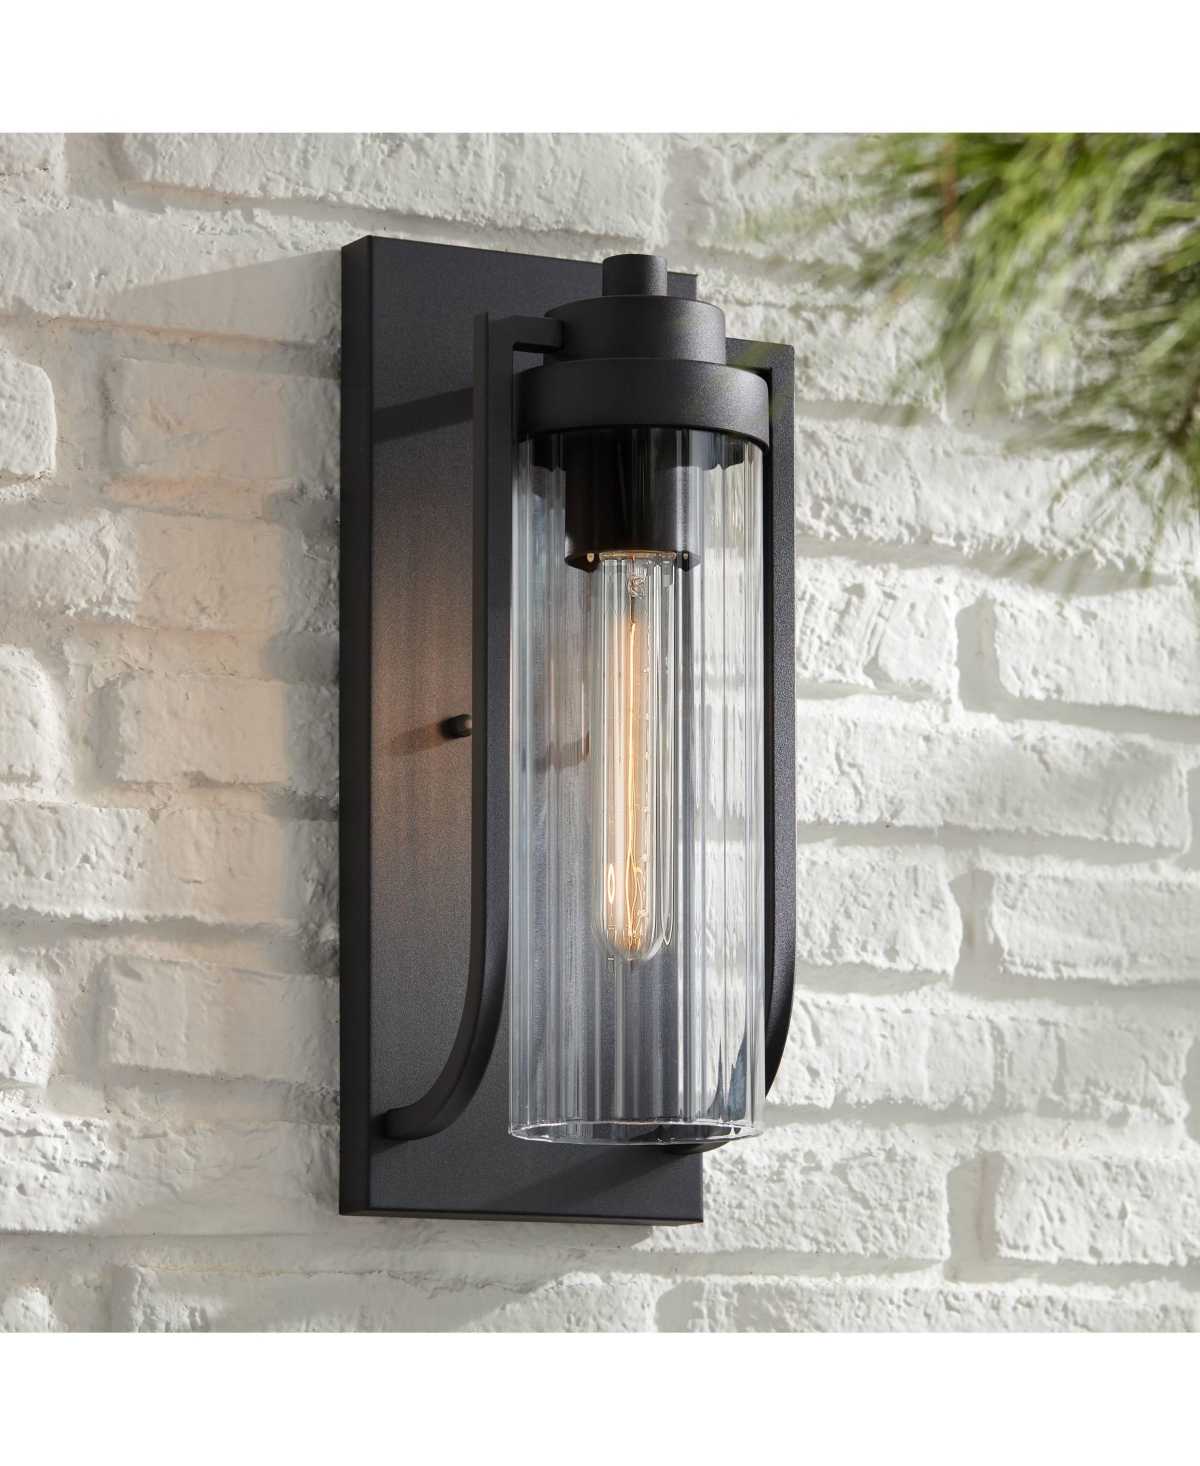 Bogata Modern Outdoor Wall Light Fixture Textured Black Steel 15 1/2" Clear Ribbed Cylinder Glass for Exterior House Porch Patio Outside Deck Garage Y